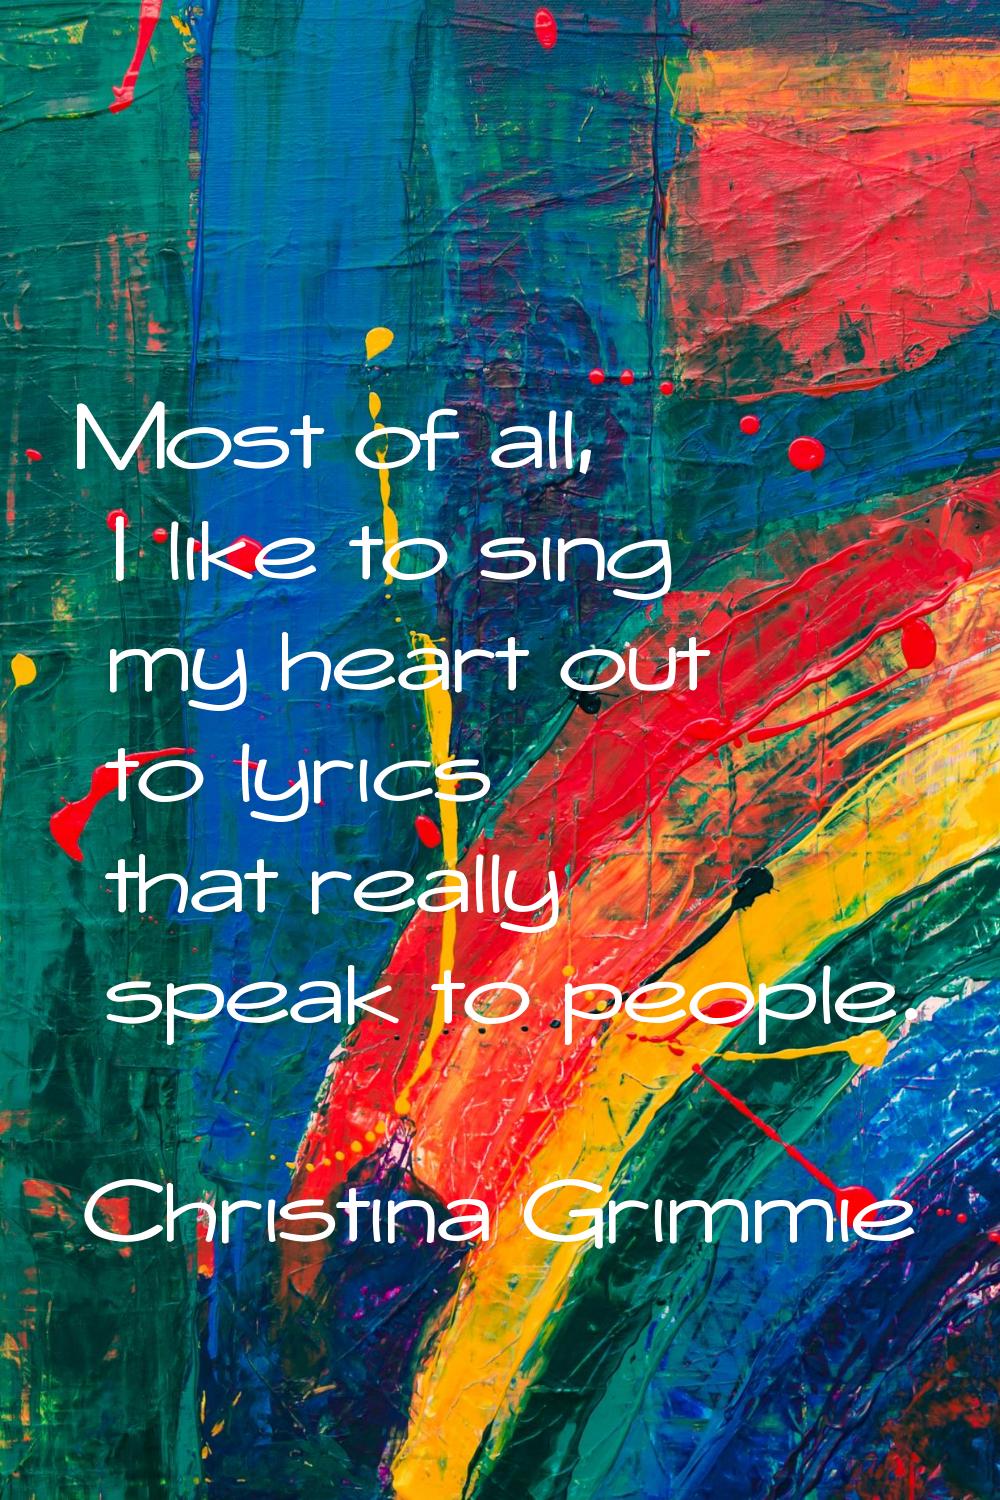 Most of all, I like to sing my heart out to lyrics that really speak to people.